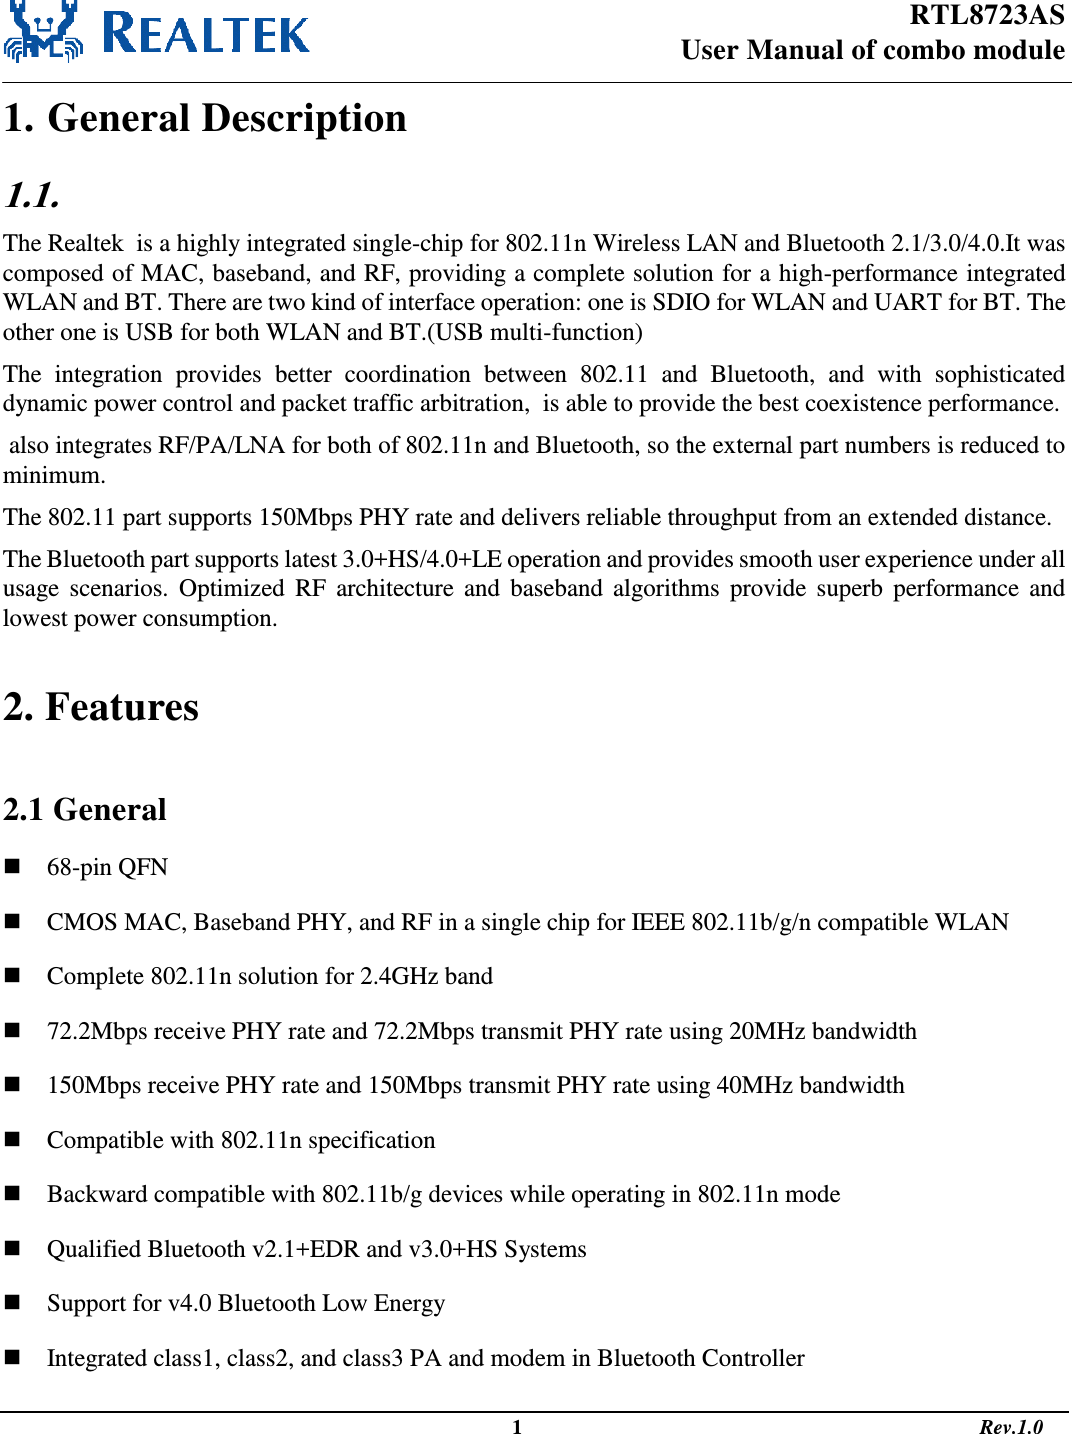 RTL8723AS User Manual of combo module                                                                                                  1                                                                                       Rev.1.0  1. General Description 1.1.   The Realtek  is a highly integrated single-chip for 802.11n Wireless LAN and Bluetooth 2.1/3.0/4.0.It was composed of MAC, baseband, and RF, providing a complete solution for a high-performance integrated WLAN and BT. There are two kind of interface operation: one is SDIO for WLAN and UART for BT. The other one is USB for both WLAN and BT.(USB multi-function) The  integration  provides  better  coordination  between  802.11  and  Bluetooth,  and  with  sophisticated dynamic power control and packet traffic arbitration,  is able to provide the best coexistence performance.   also integrates RF/PA/LNA for both of 802.11n and Bluetooth, so the external part numbers is reduced to minimum.  The 802.11 part supports 150Mbps PHY rate and delivers reliable throughput from an extended distance.  The Bluetooth part supports latest 3.0+HS/4.0+LE operation and provides smooth user experience under all usage  scenarios.  Optimized  RF  architecture and  baseband  algorithms provide  superb  performance  and lowest power consumption.   2. Features  2.1 General  68-pin QFN  CMOS MAC, Baseband PHY, and RF in a single chip for IEEE 802.11b/g/n compatible WLAN  Complete 802.11n solution for 2.4GHz band  72.2Mbps receive PHY rate and 72.2Mbps transmit PHY rate using 20MHz bandwidth  150Mbps receive PHY rate and 150Mbps transmit PHY rate using 40MHz bandwidth  Compatible with 802.11n specification  Backward compatible with 802.11b/g devices while operating in 802.11n mode  Qualified Bluetooth v2.1+EDR and v3.0+HS Systems  Support for v4.0 Bluetooth Low Energy  Integrated class1, class2, and class3 PA and modem in Bluetooth Controller 